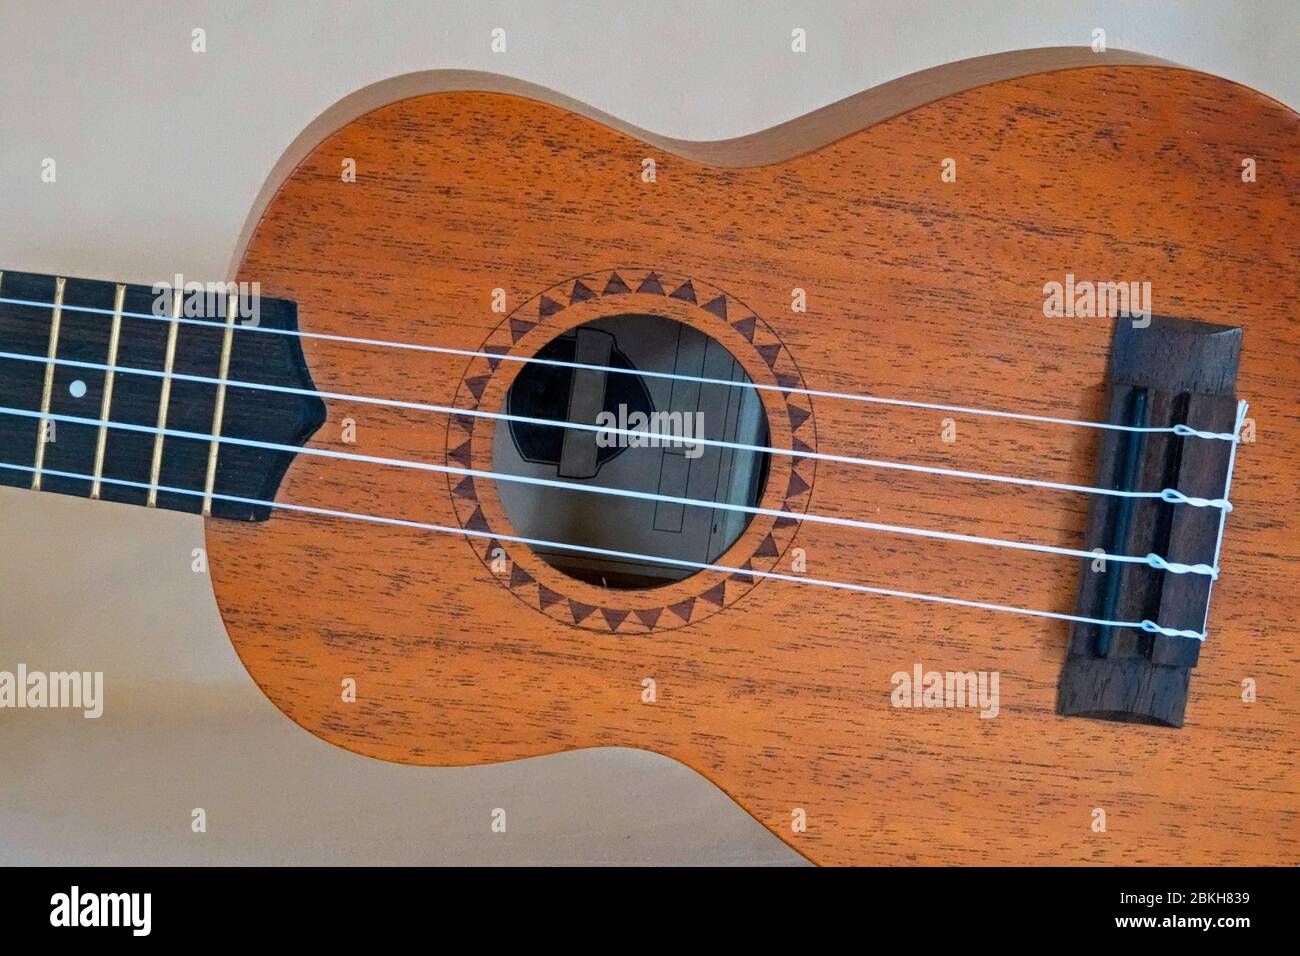 Detail of a professional quality Ukelele, or Ukulele, a musical instrument first developed by the Hawaiians in the 1800s. Stock Photo